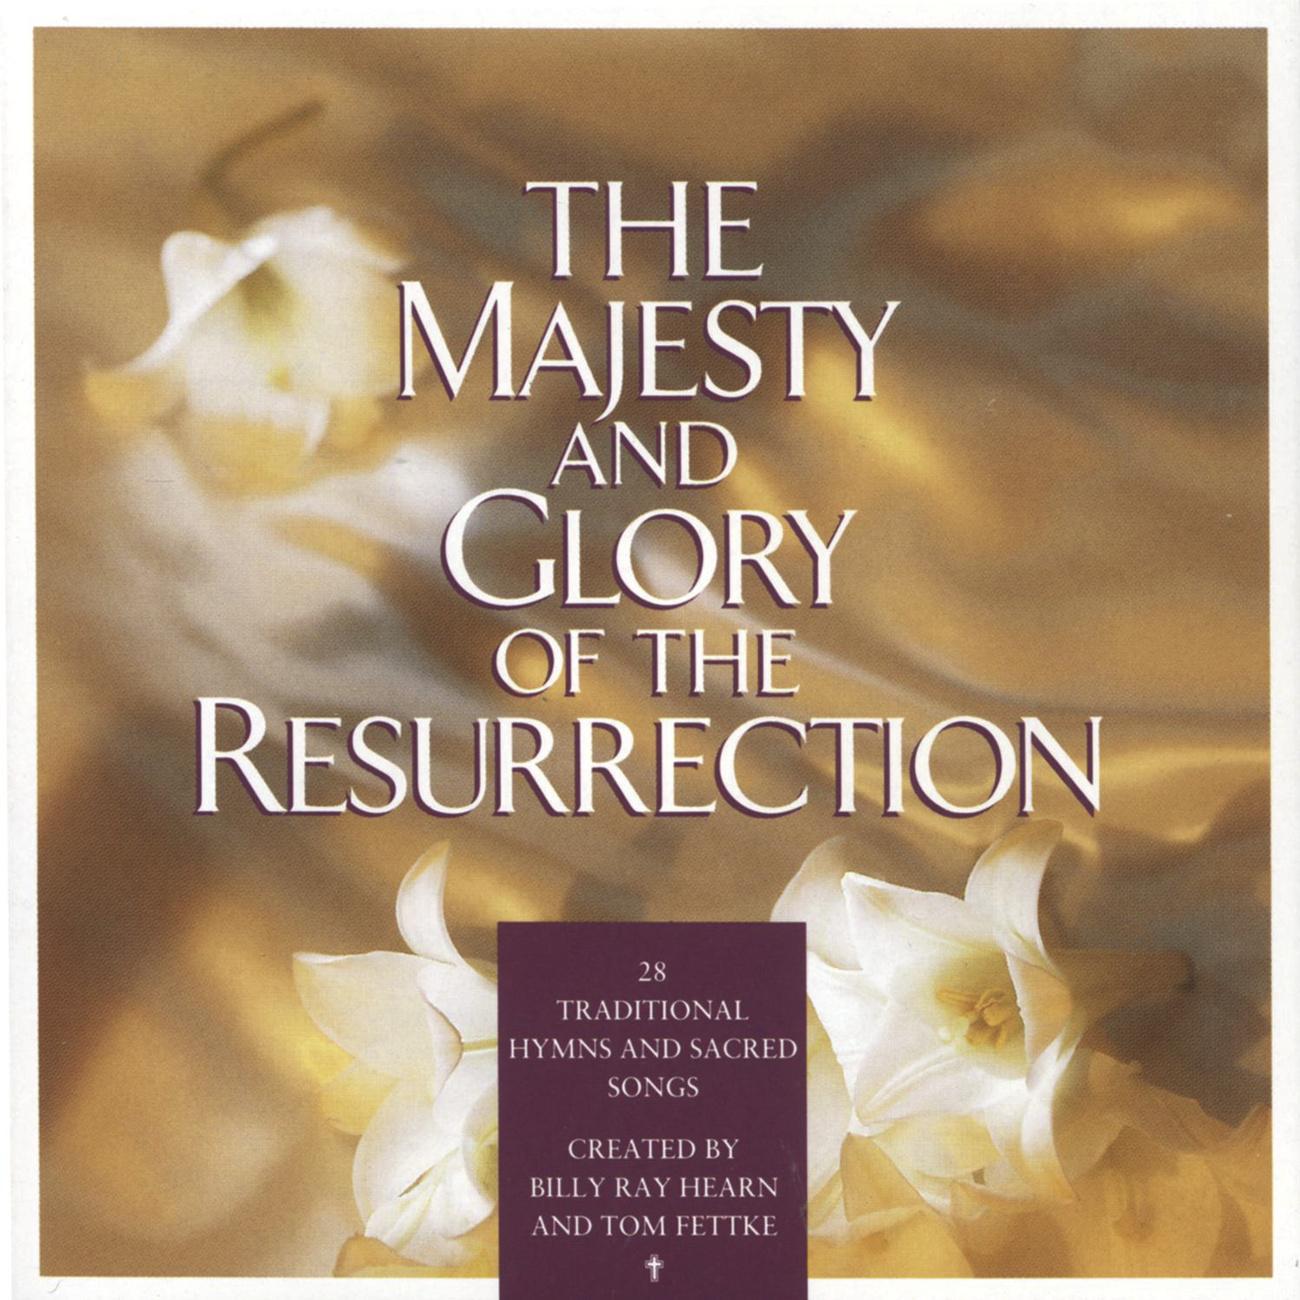 Billy Ray Hearn - God's Almighty Son (Majesty And Glory Of The Resurrection Album Version)